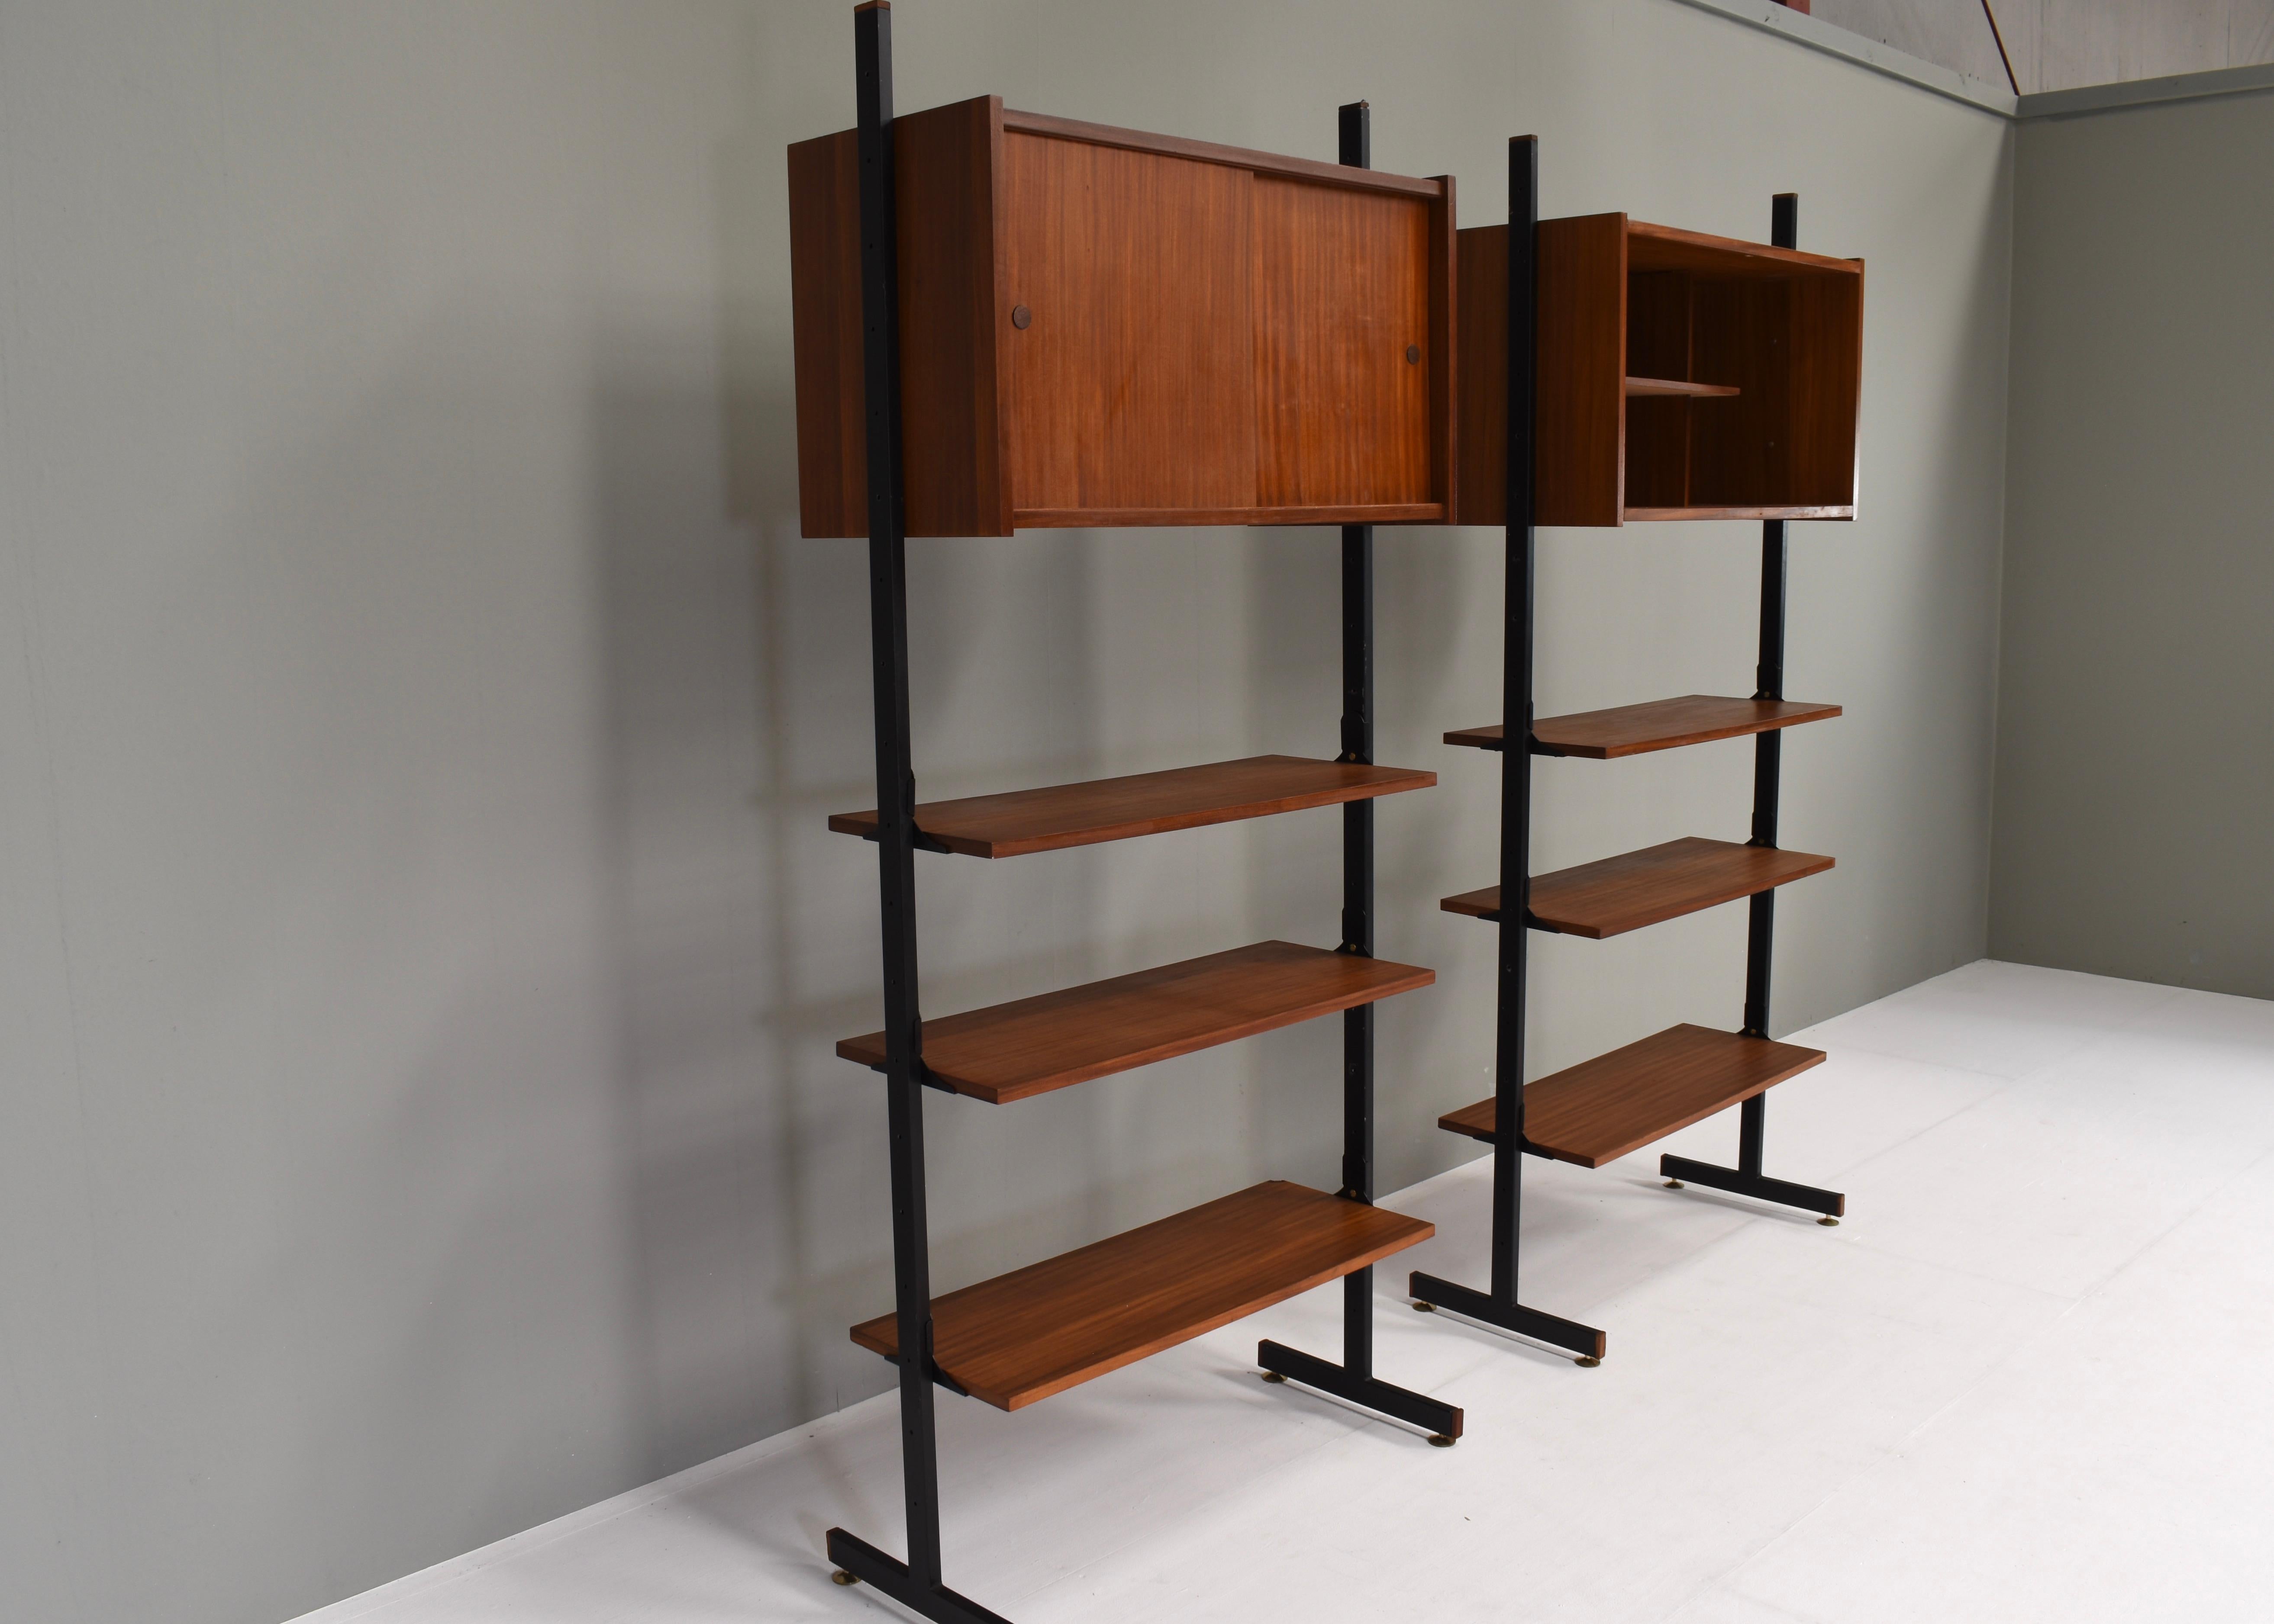 Mid-Century Modern Italian Wall Unit / Room Dividers in Teak and Brass, Italy, circa 1950-70 For Sale